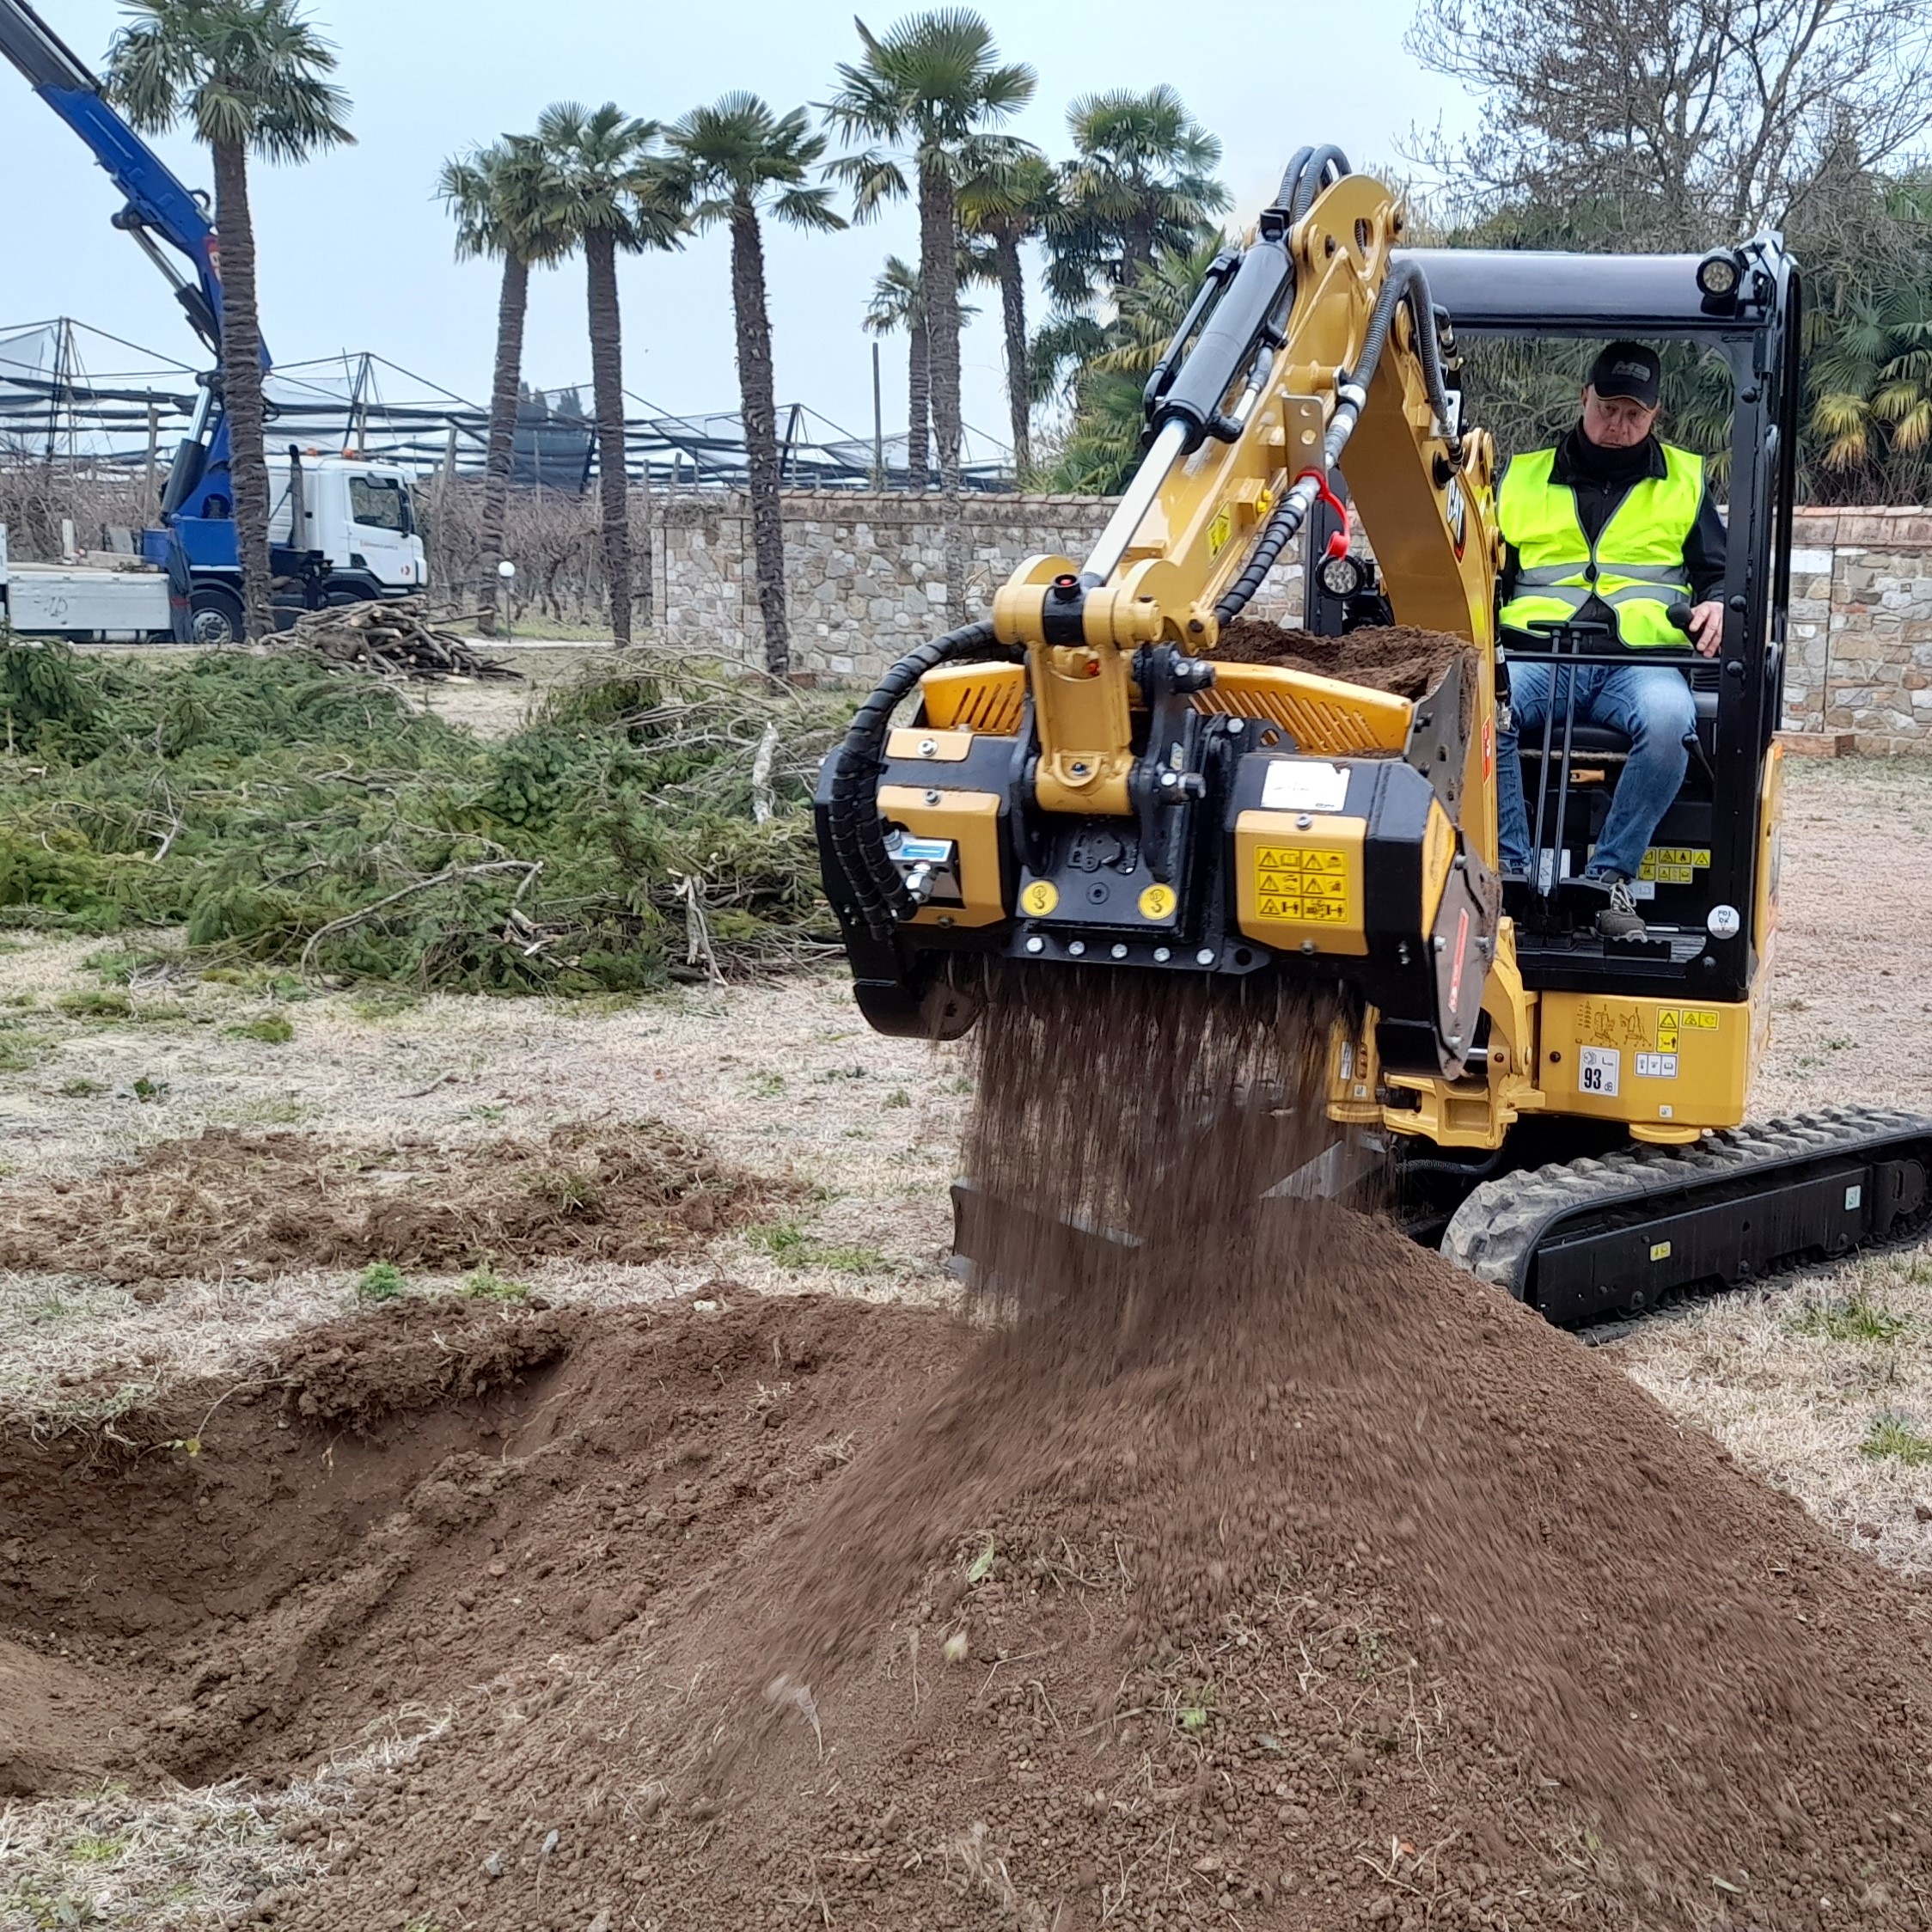 Good Things Come In Small Packages: New Attachments For Your Job Site